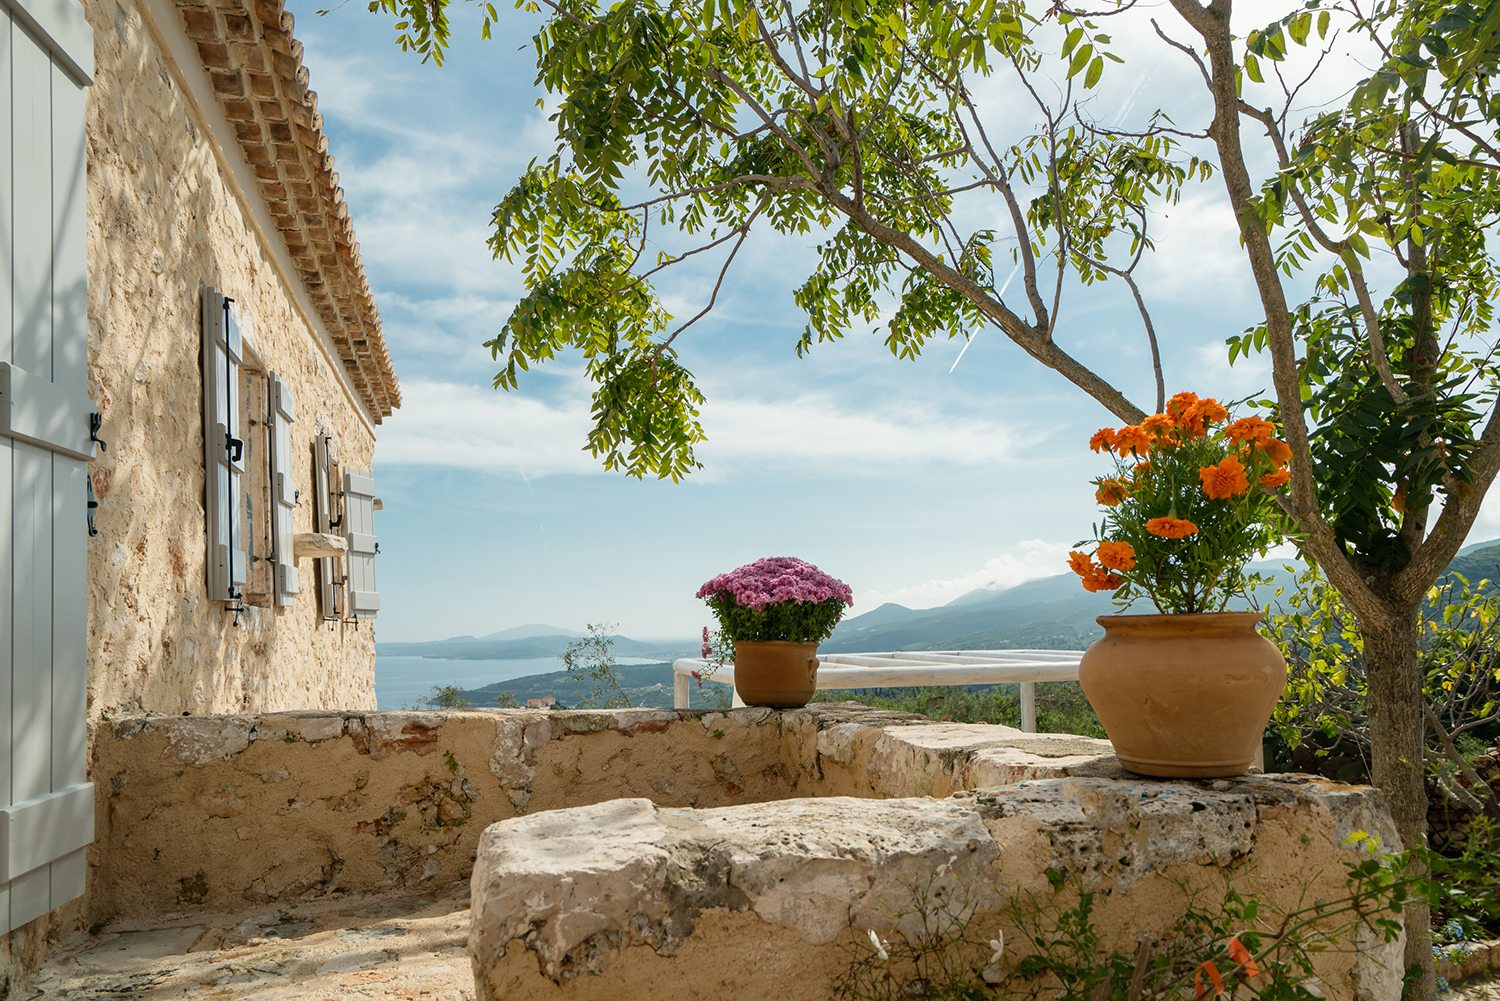 Traditional stone greek villa for 6 people in Zakynthos with blue wooden shutters and plants in terracotta pots